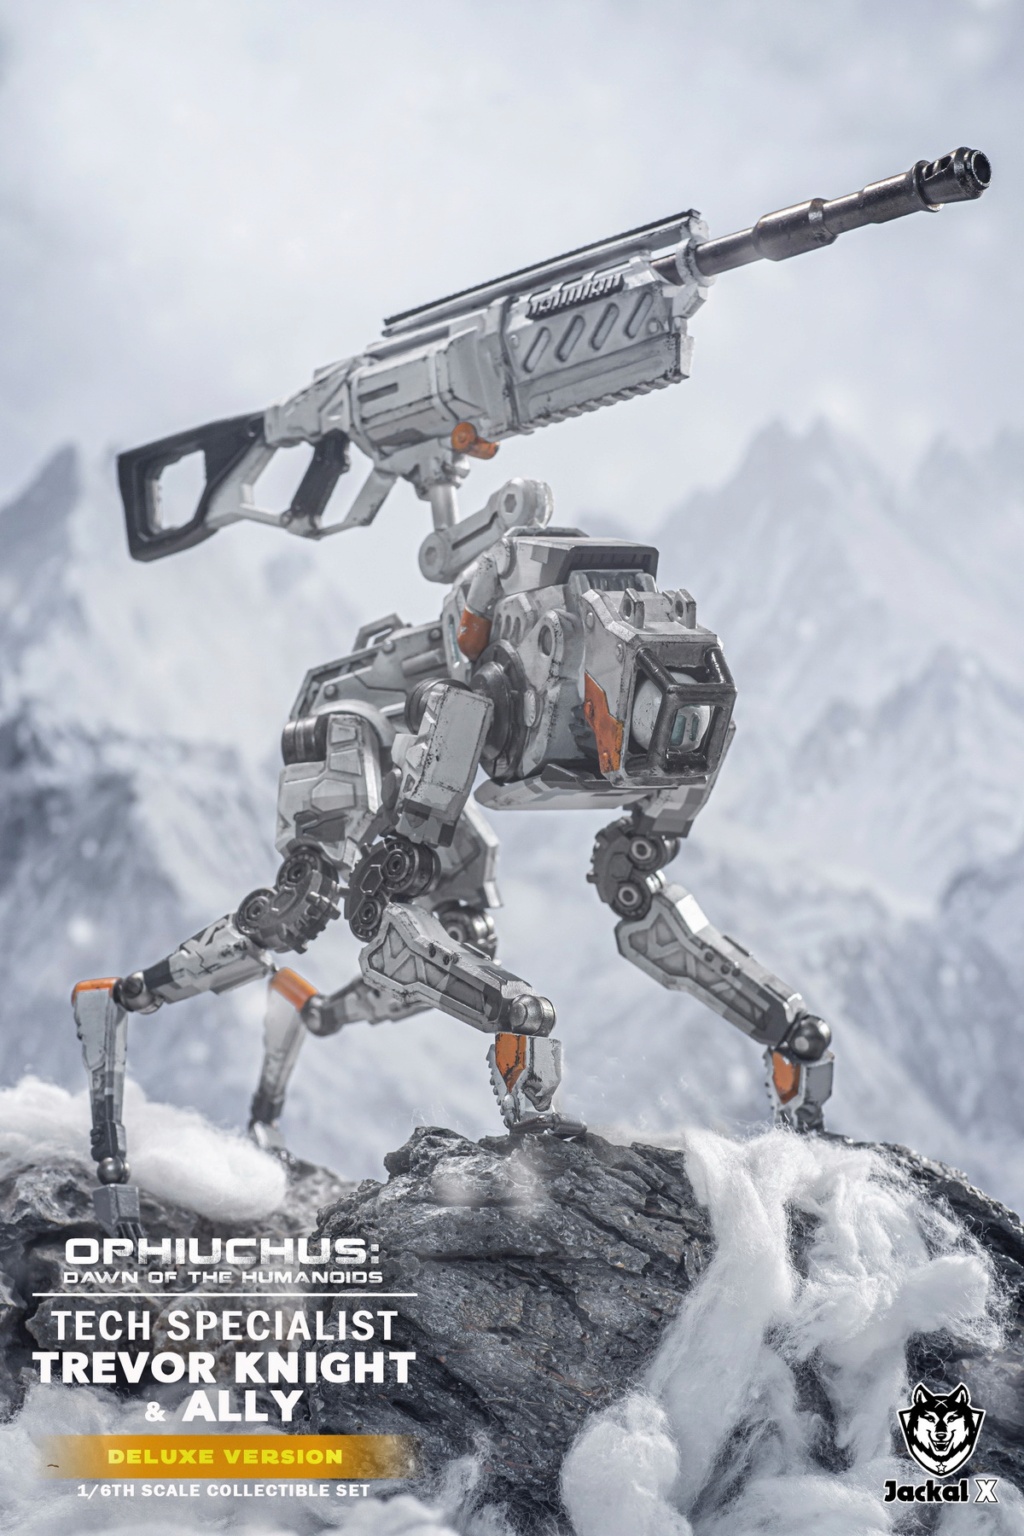 Ally - NEW PRODUCT: JackalX: JX014 1/6 Scale Tech Specialist Trevor Knight & Ally action figures 17064811